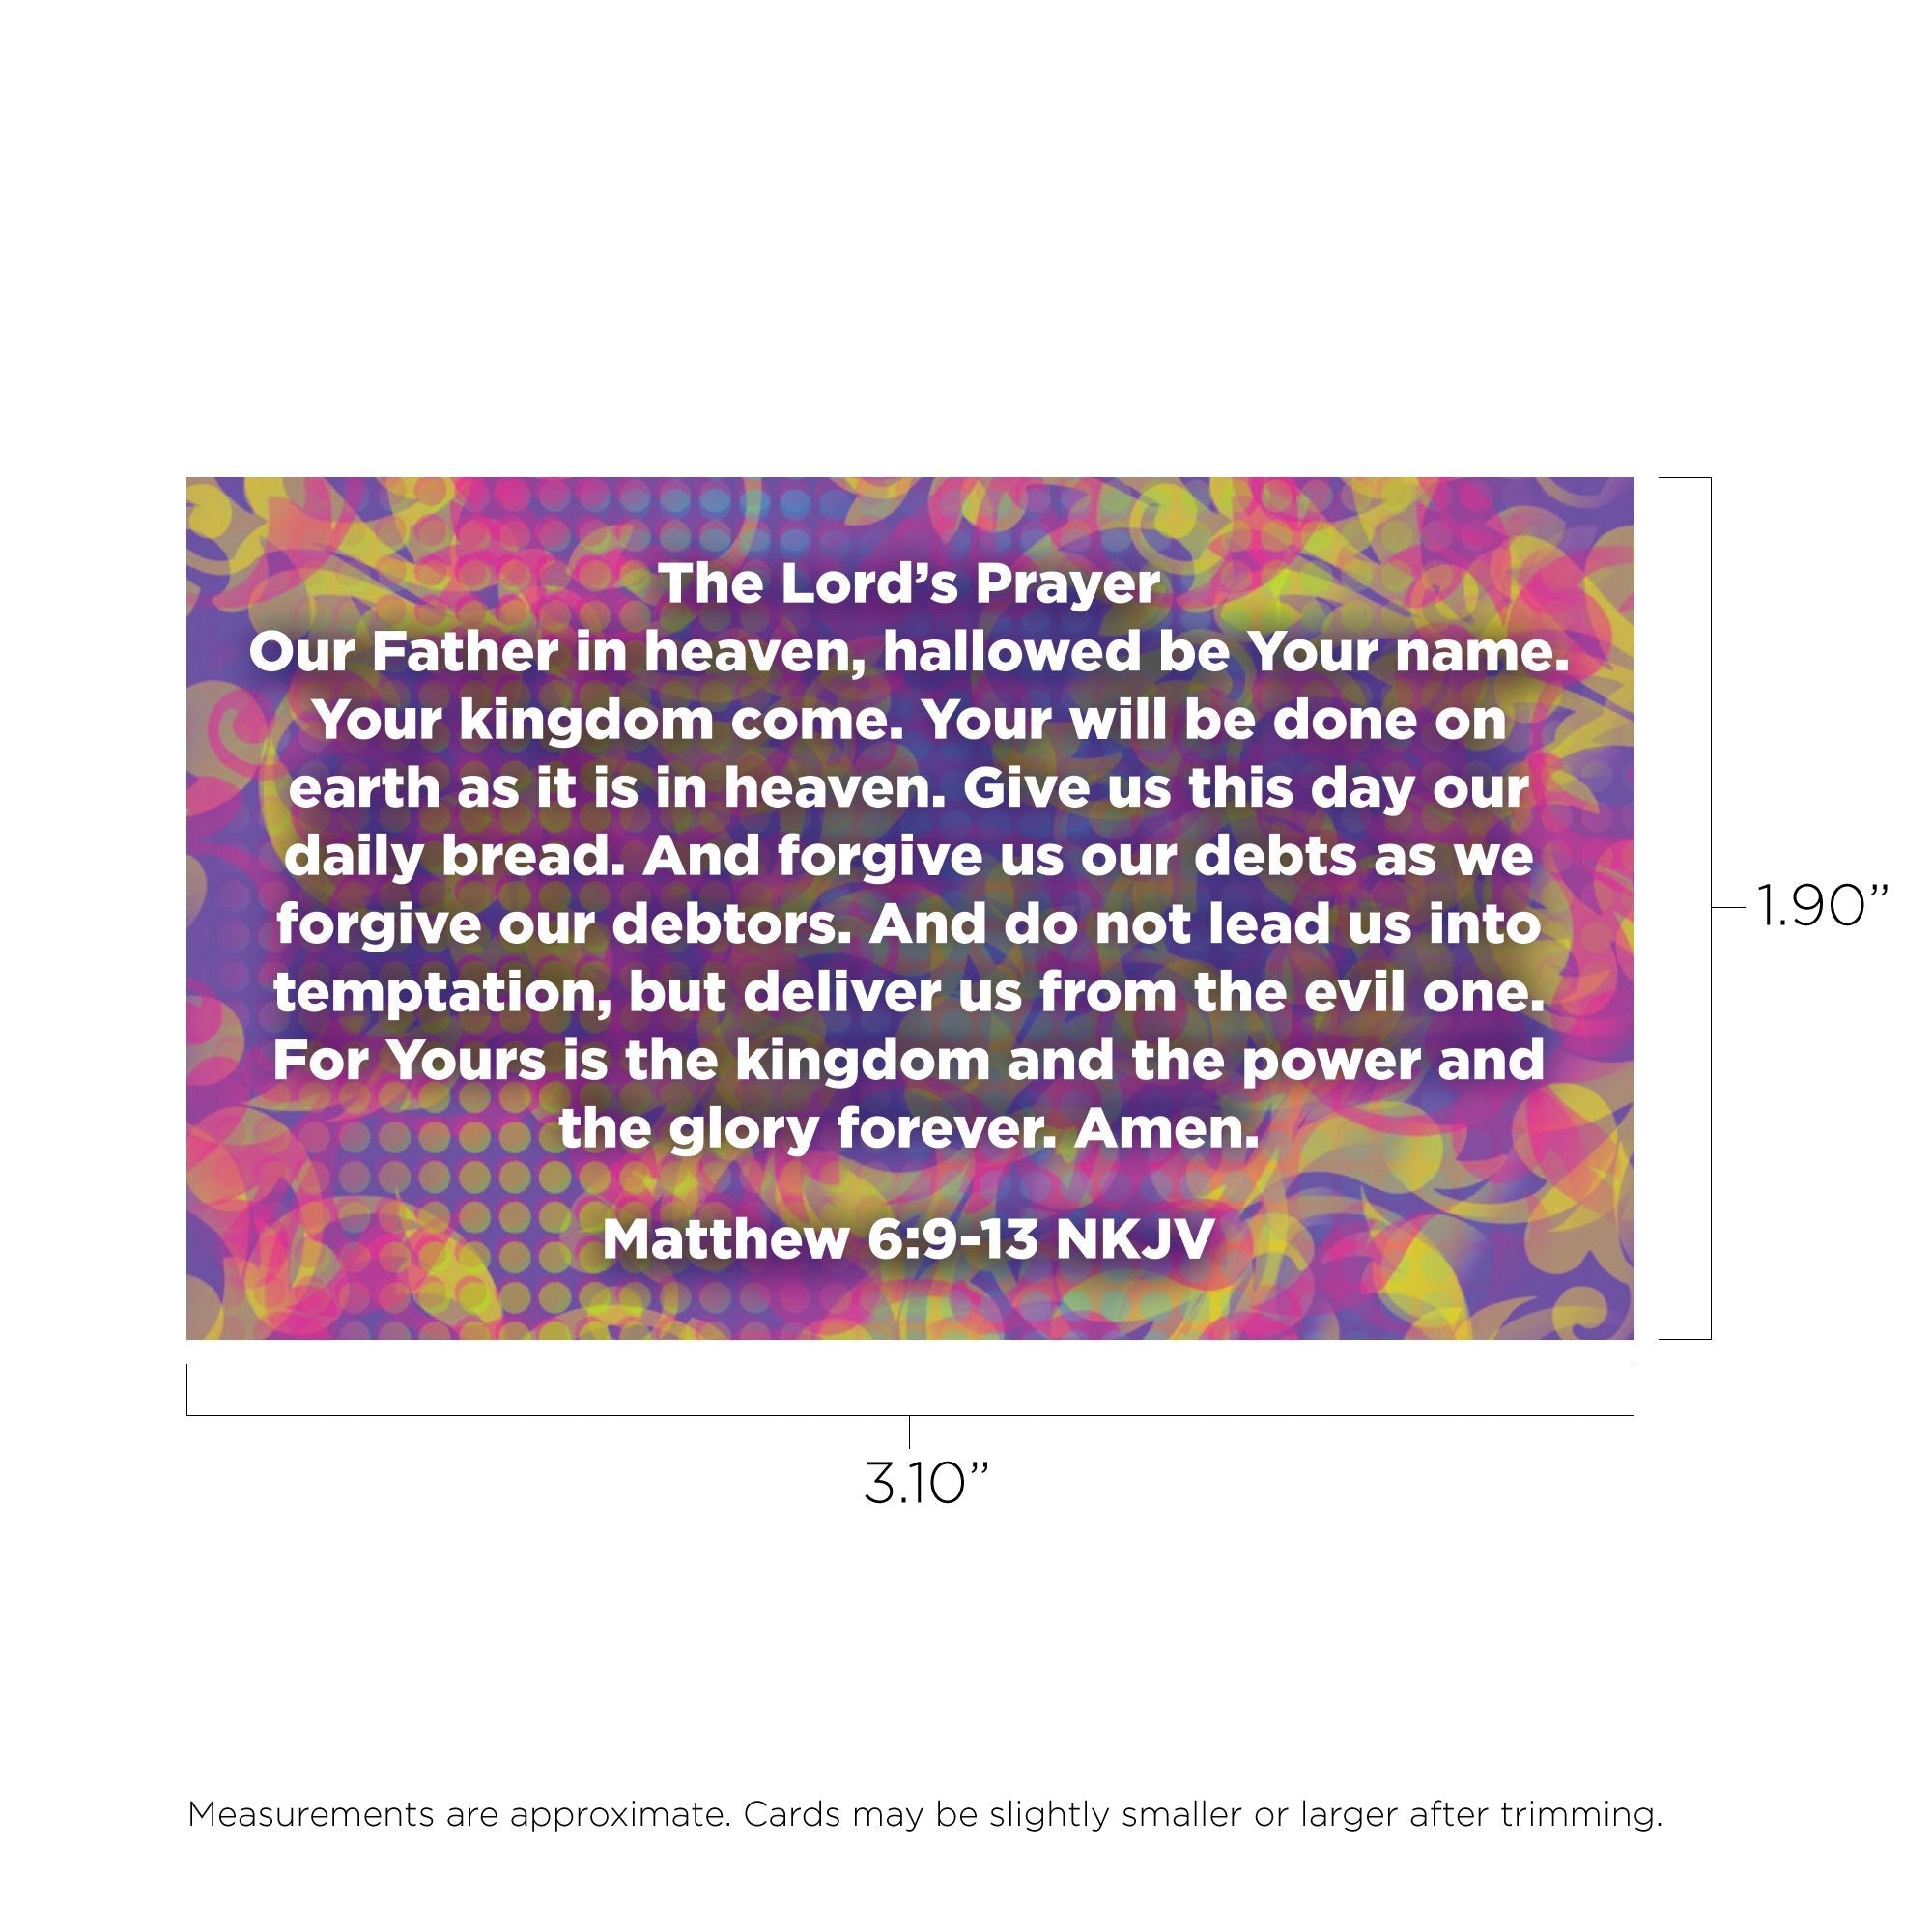 Children's Pass Along Scripture Cards - The Lord's Prayer, Pack of 25